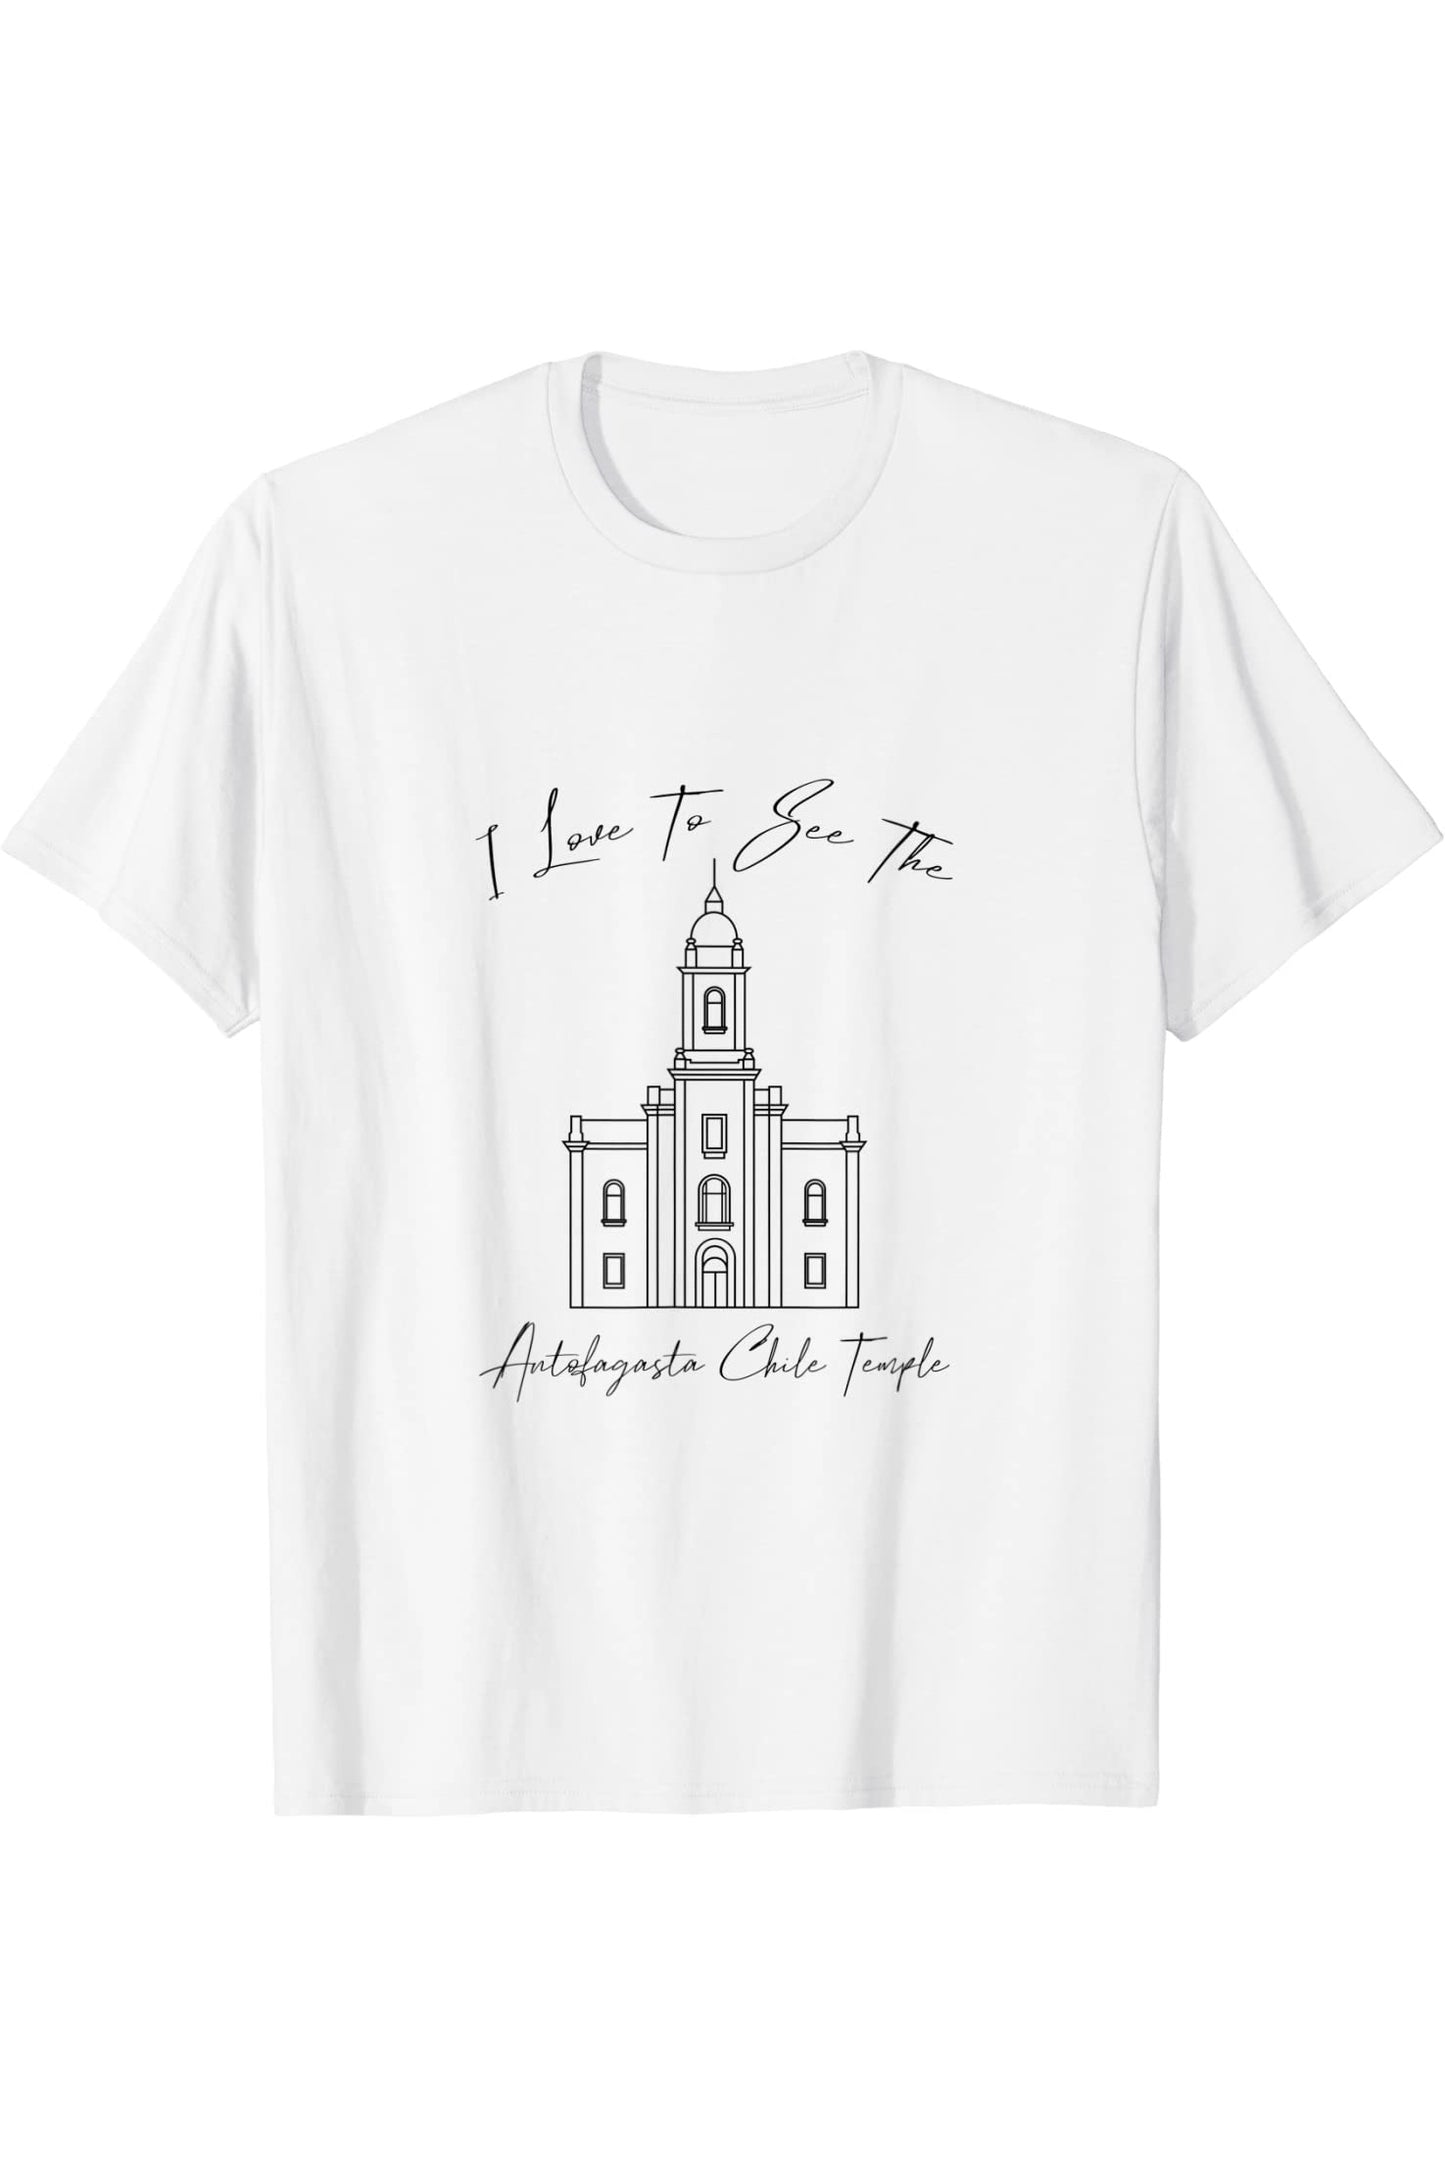 Antofagasta Chile Temple T-Shirt - Calligraphy Style (English) US